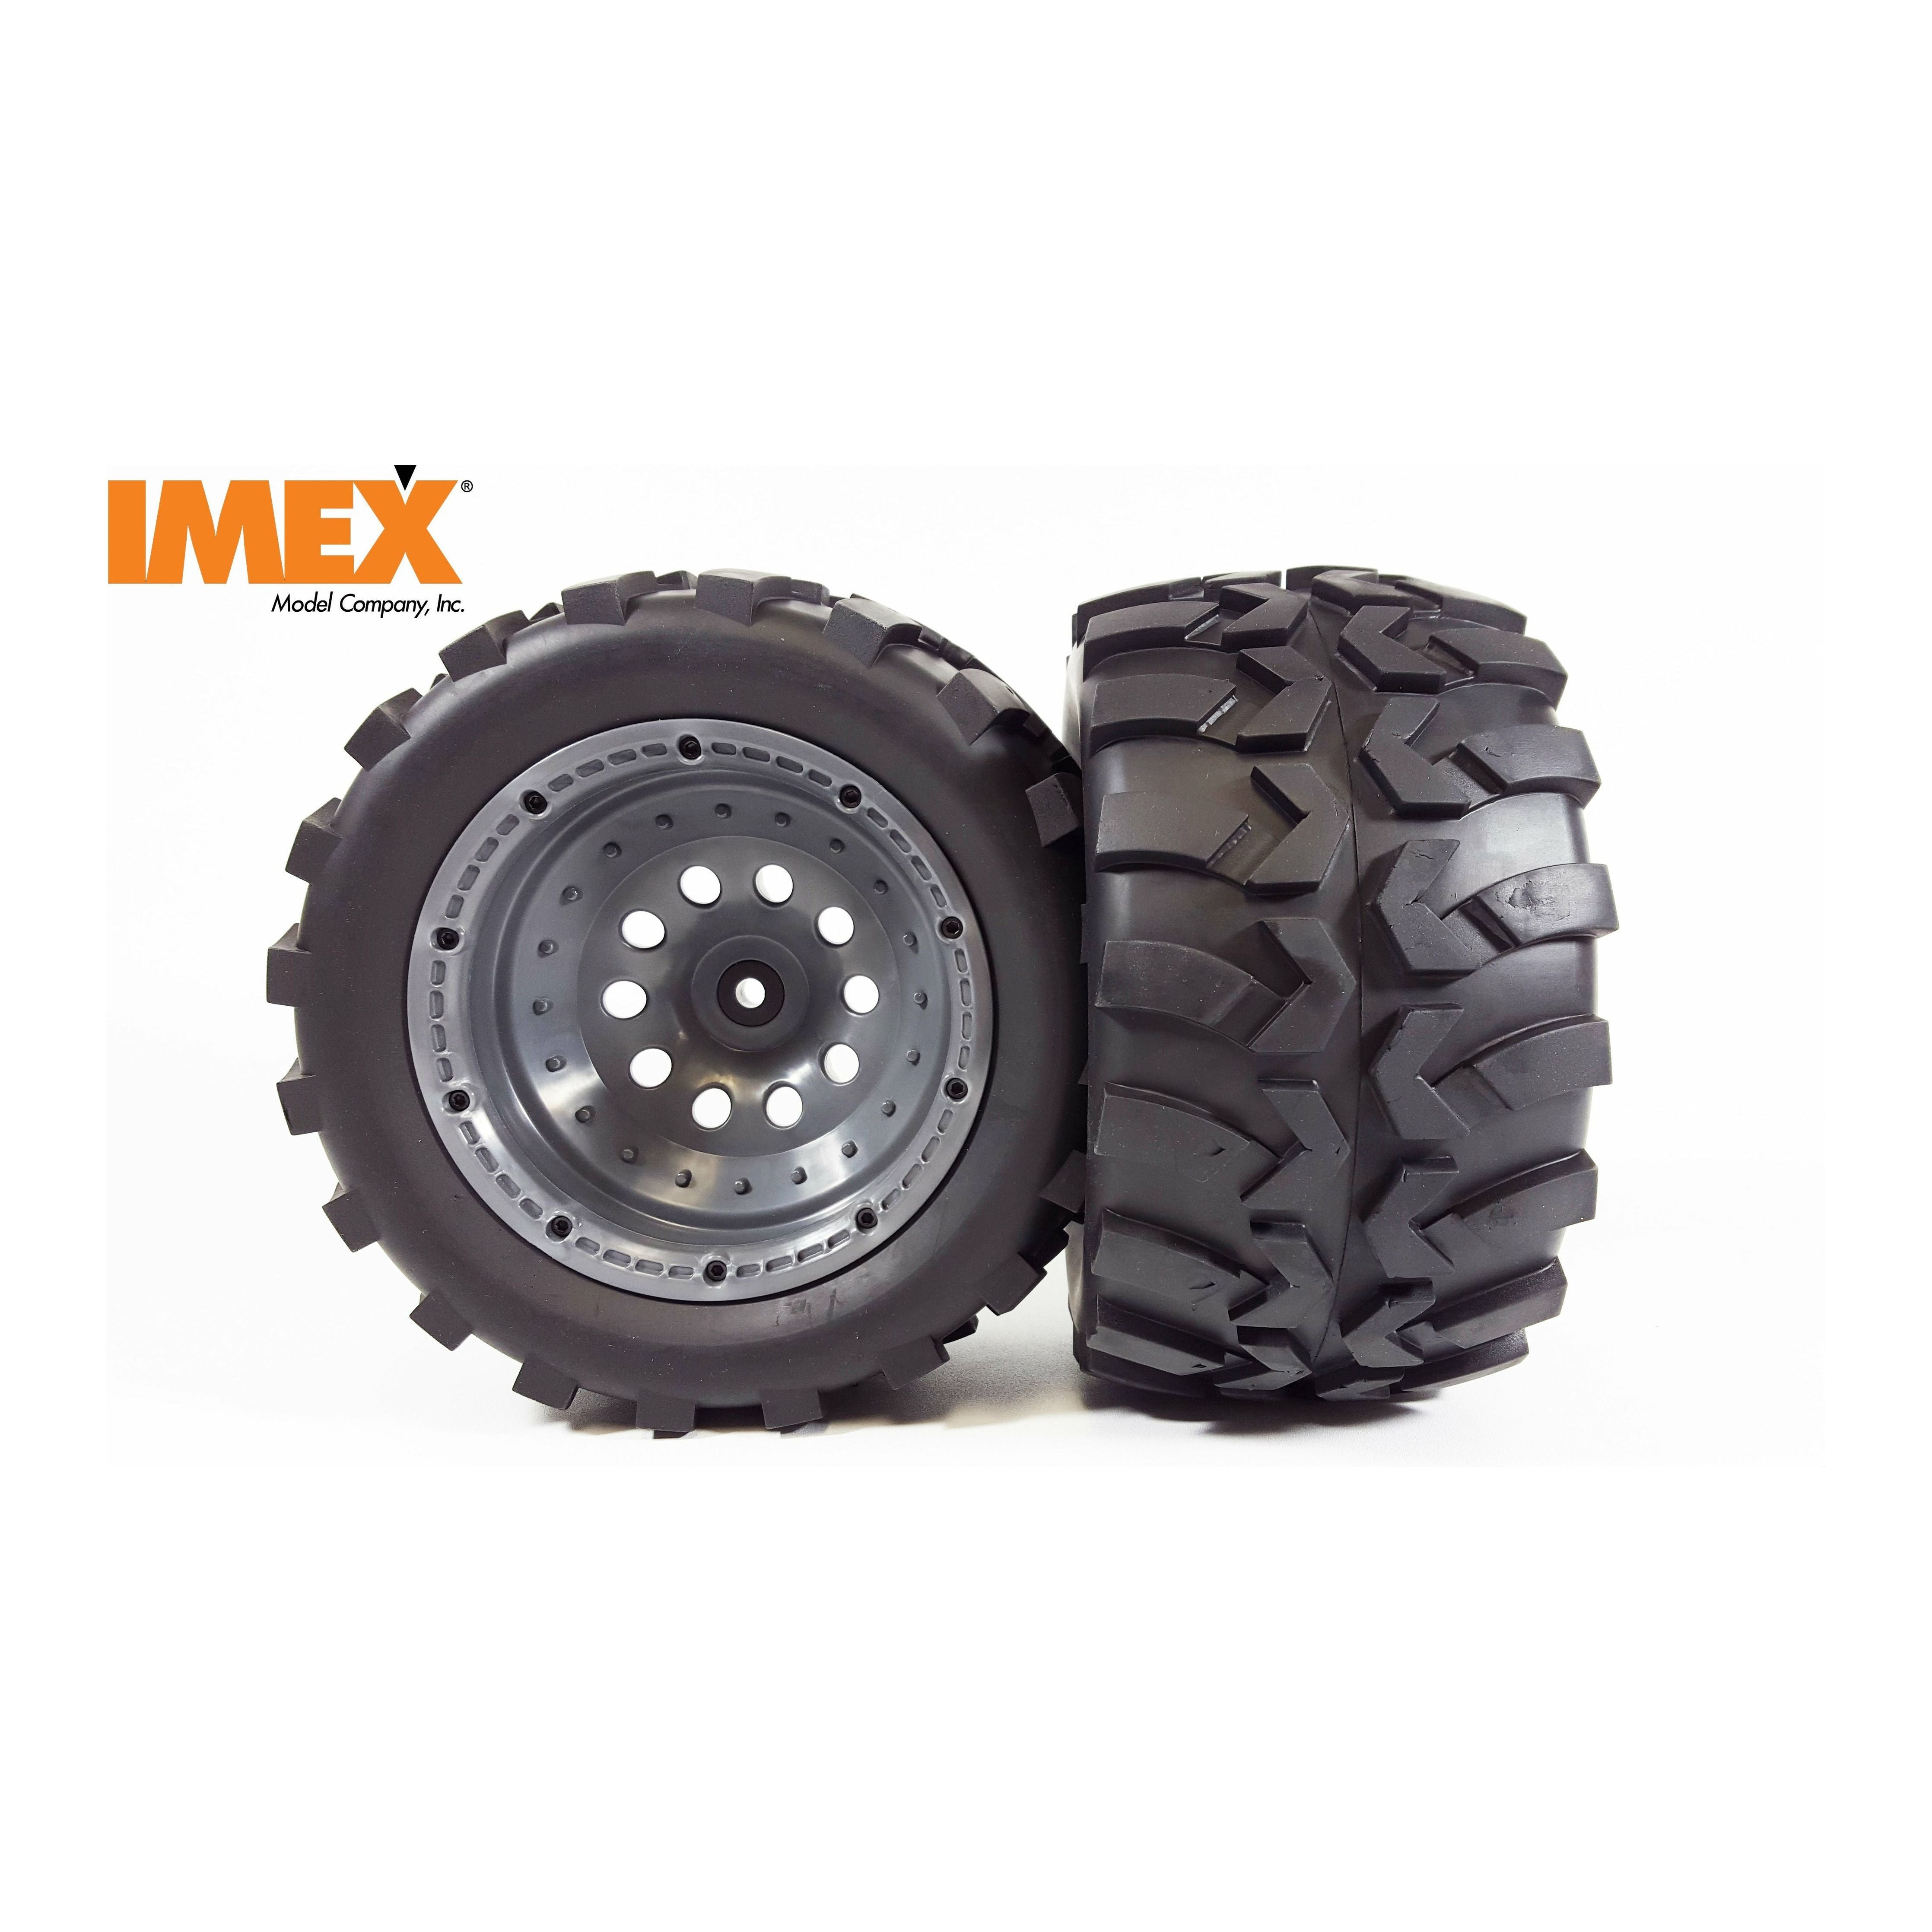 J-7 Tires & Pluto Rims with Beadlocks 24mm Hex (1 Pair) (Choose Color Combos)